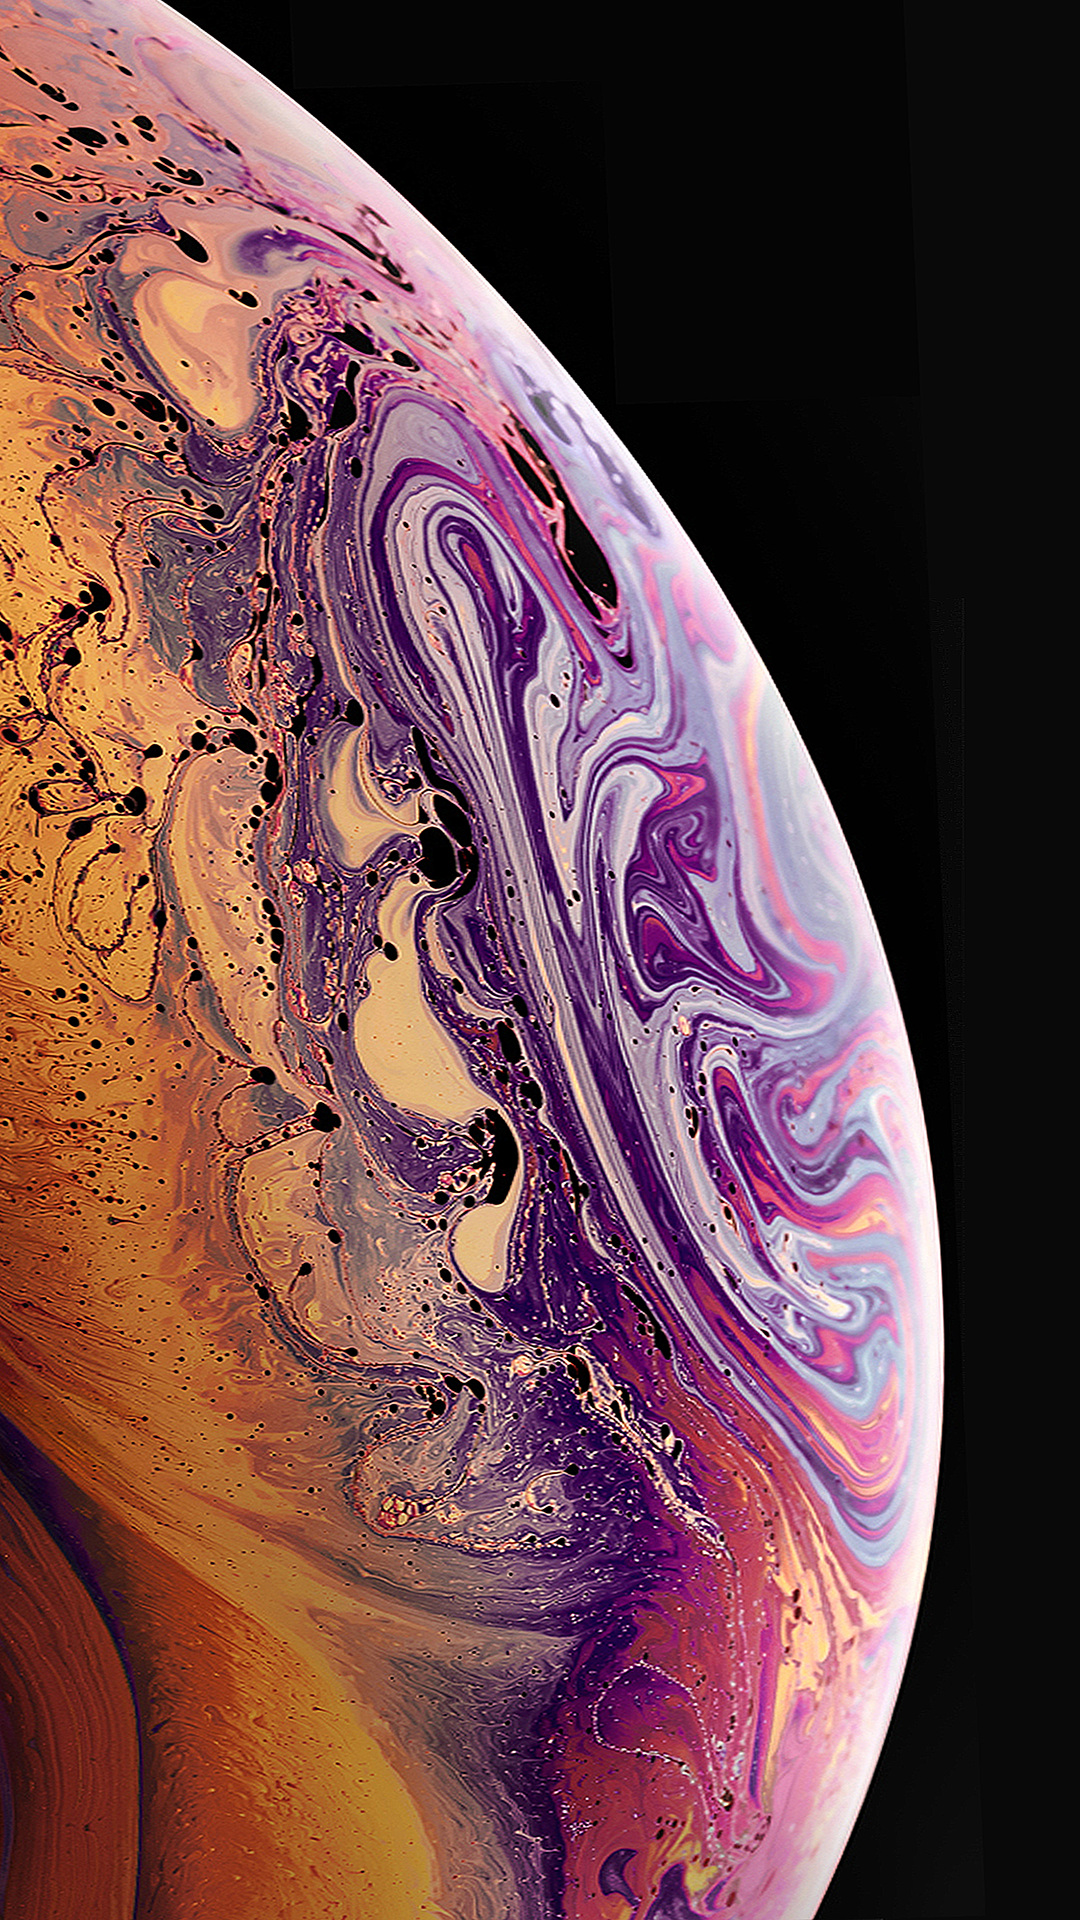 iOS 12 Wallpaper for iPhone Xs, Xs Max and Xr (By and @AR72014)